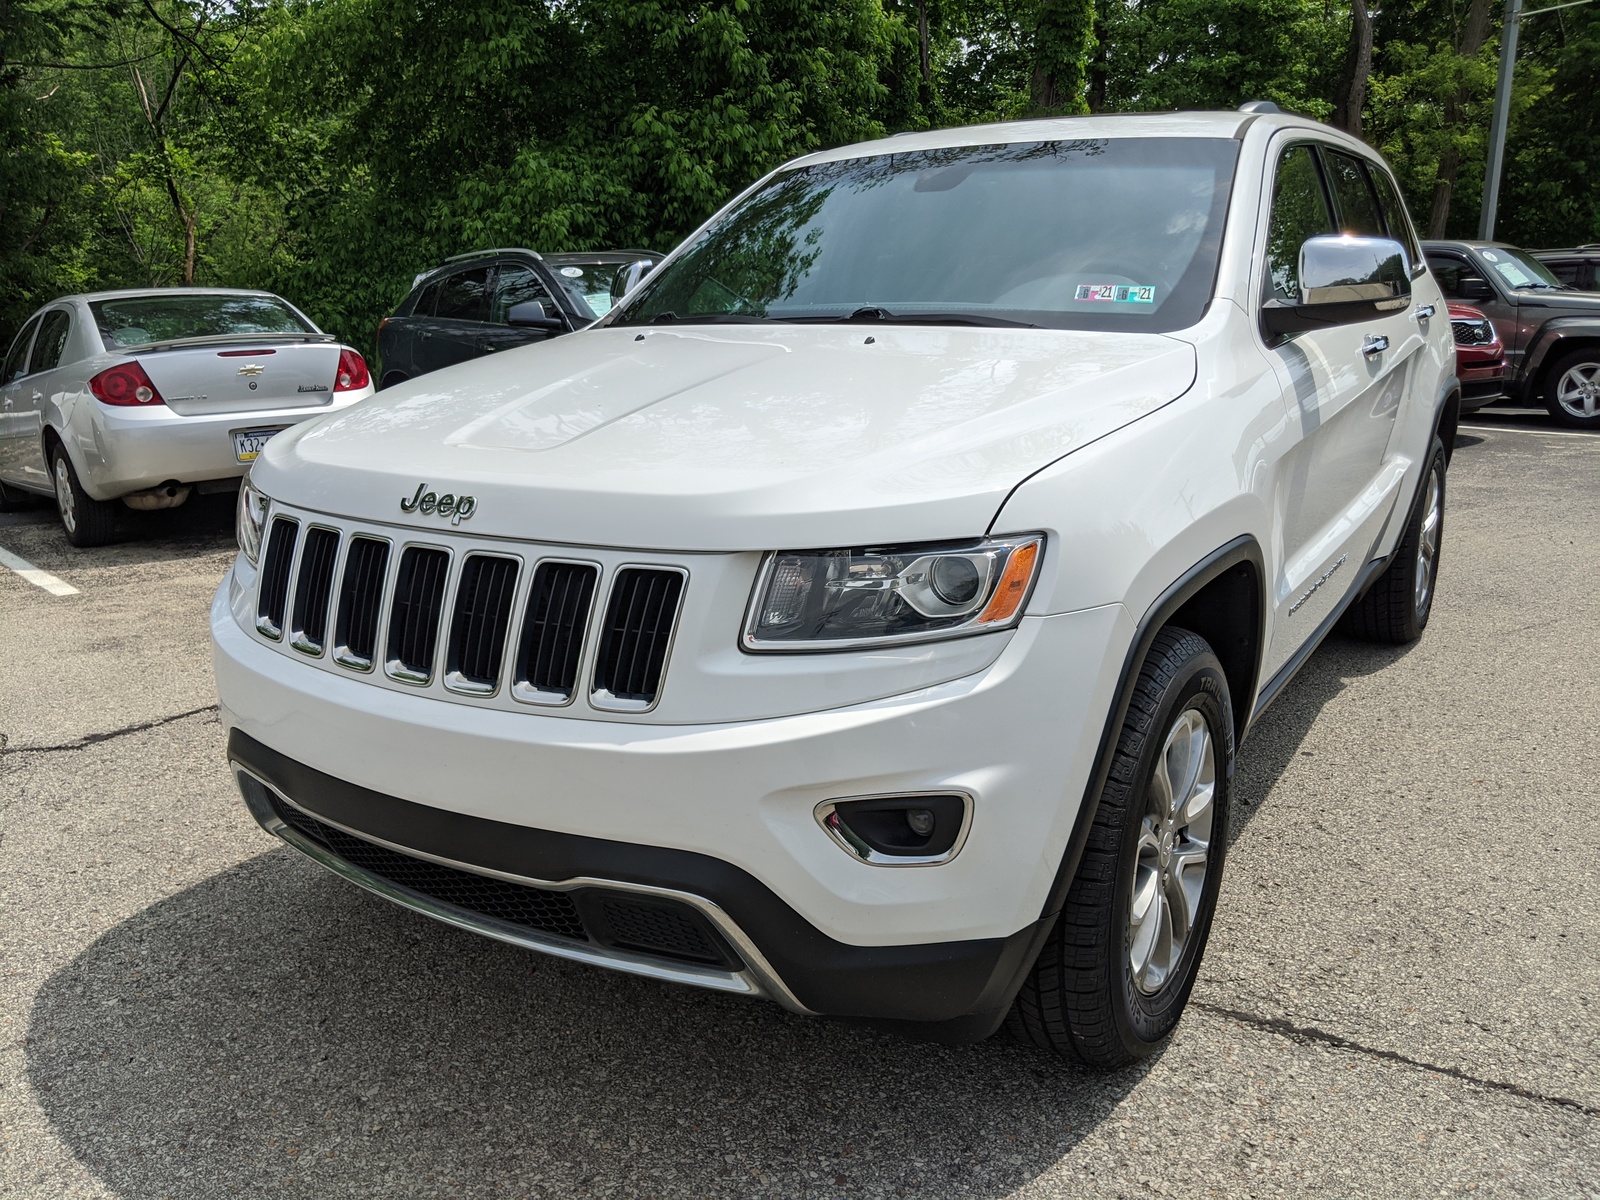 PreOwned 2015 Jeep Grand Cherokee Limited in Bright White